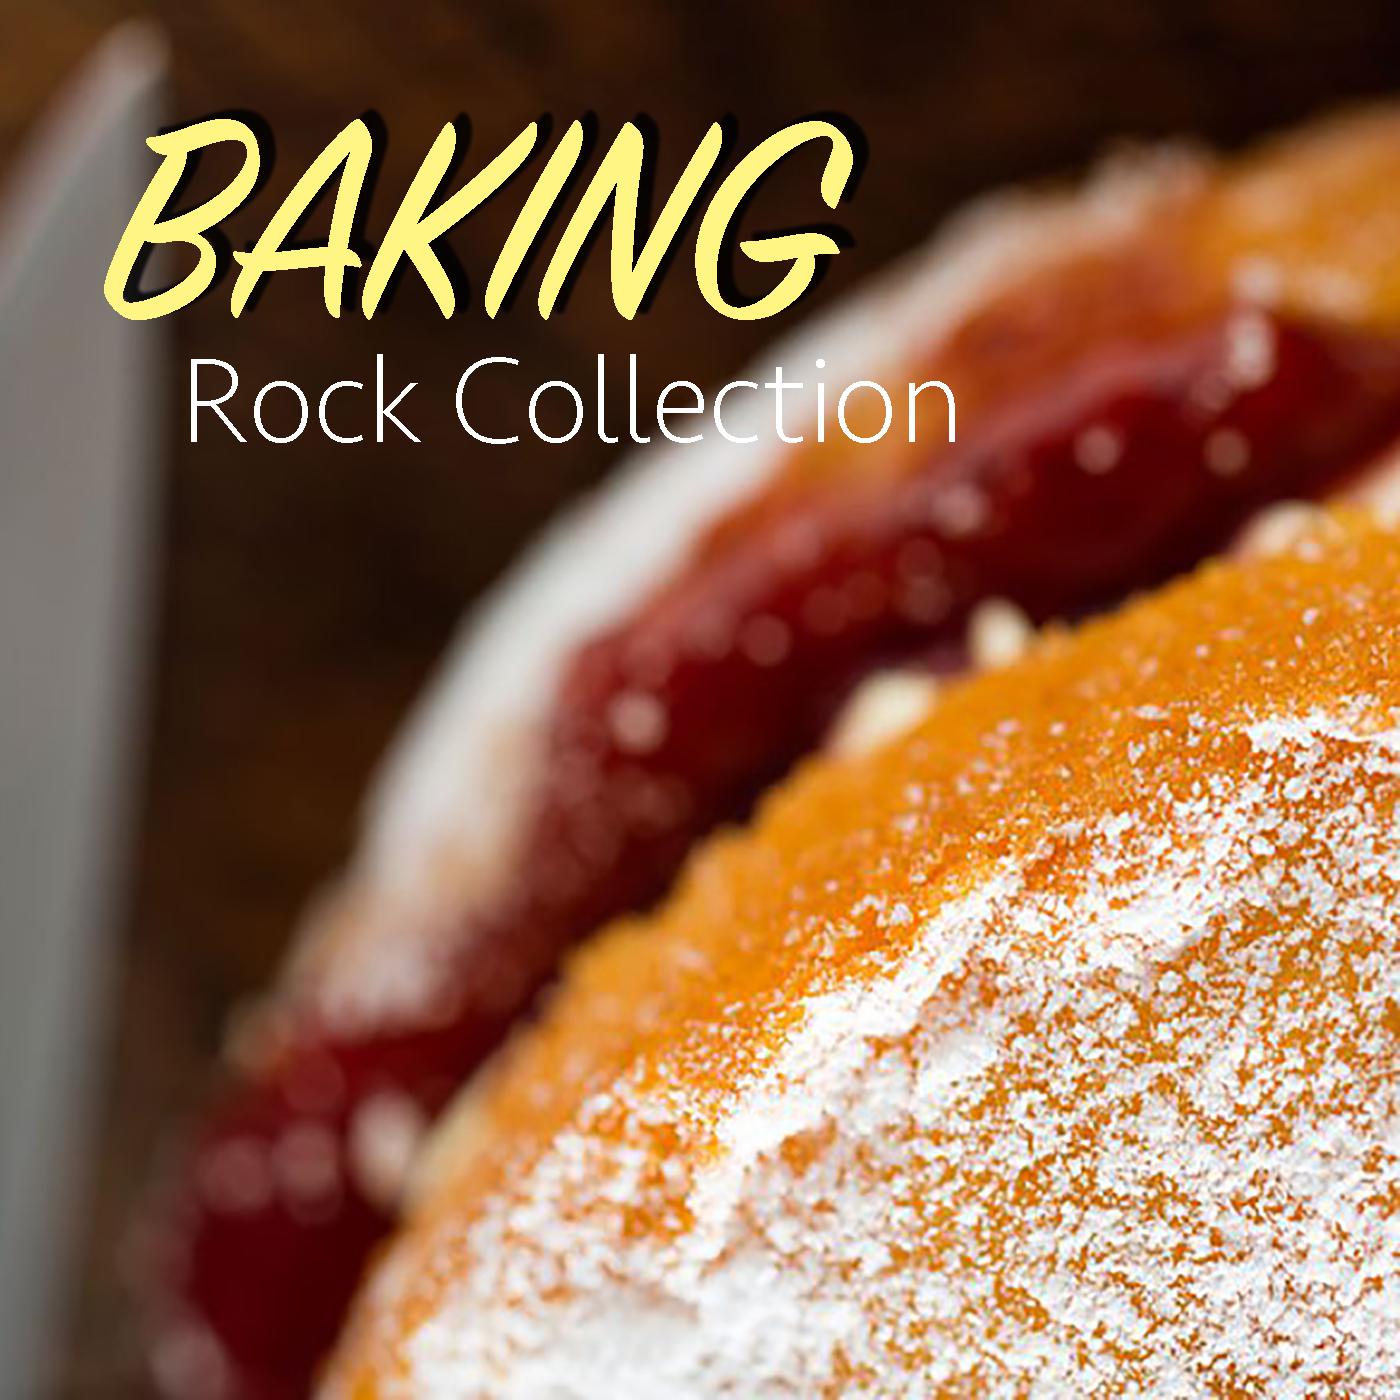 Baking Rock Collection